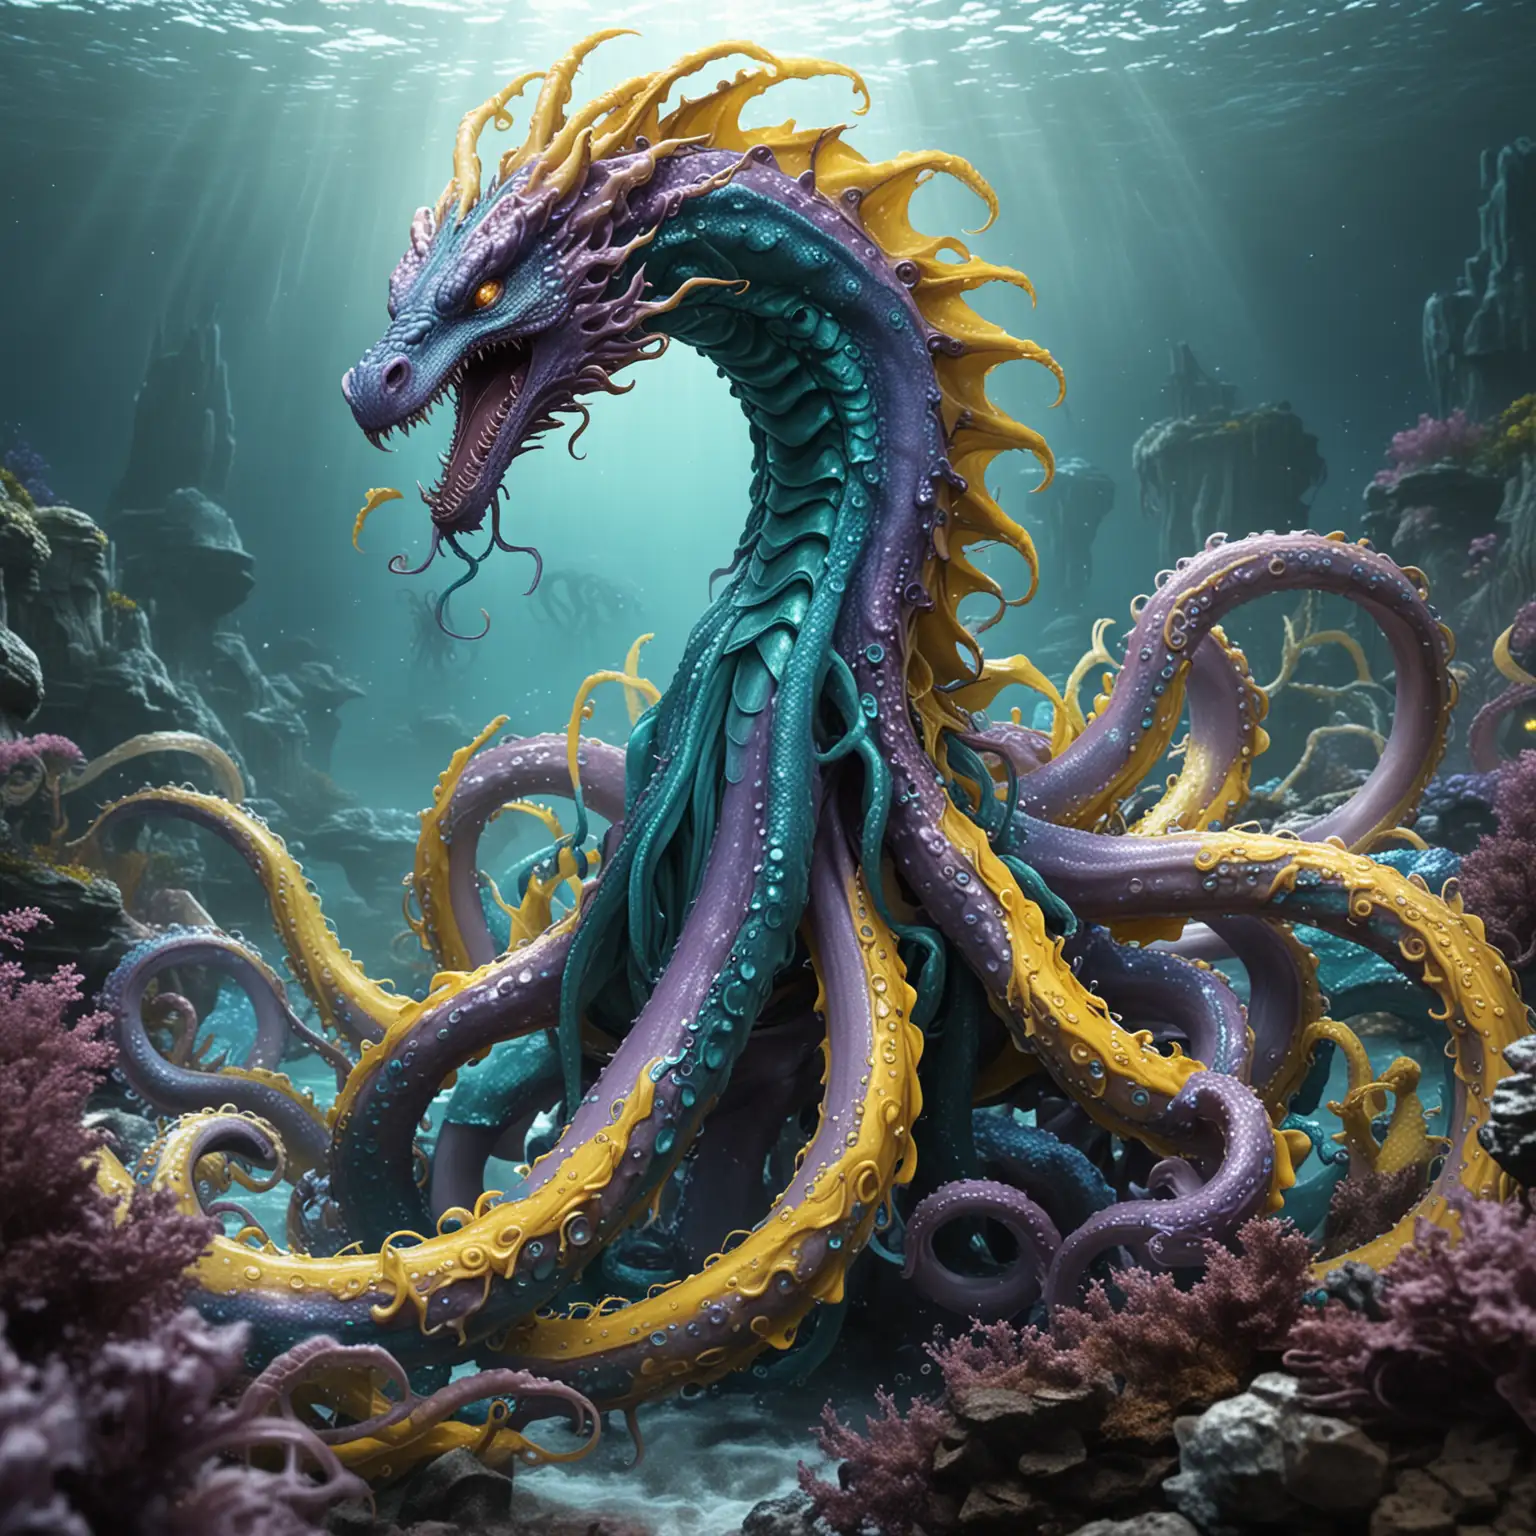 Tentacle dragon, long thick slimy tentacles, high definition, epic scenery, blue, teal, yellow, mauve